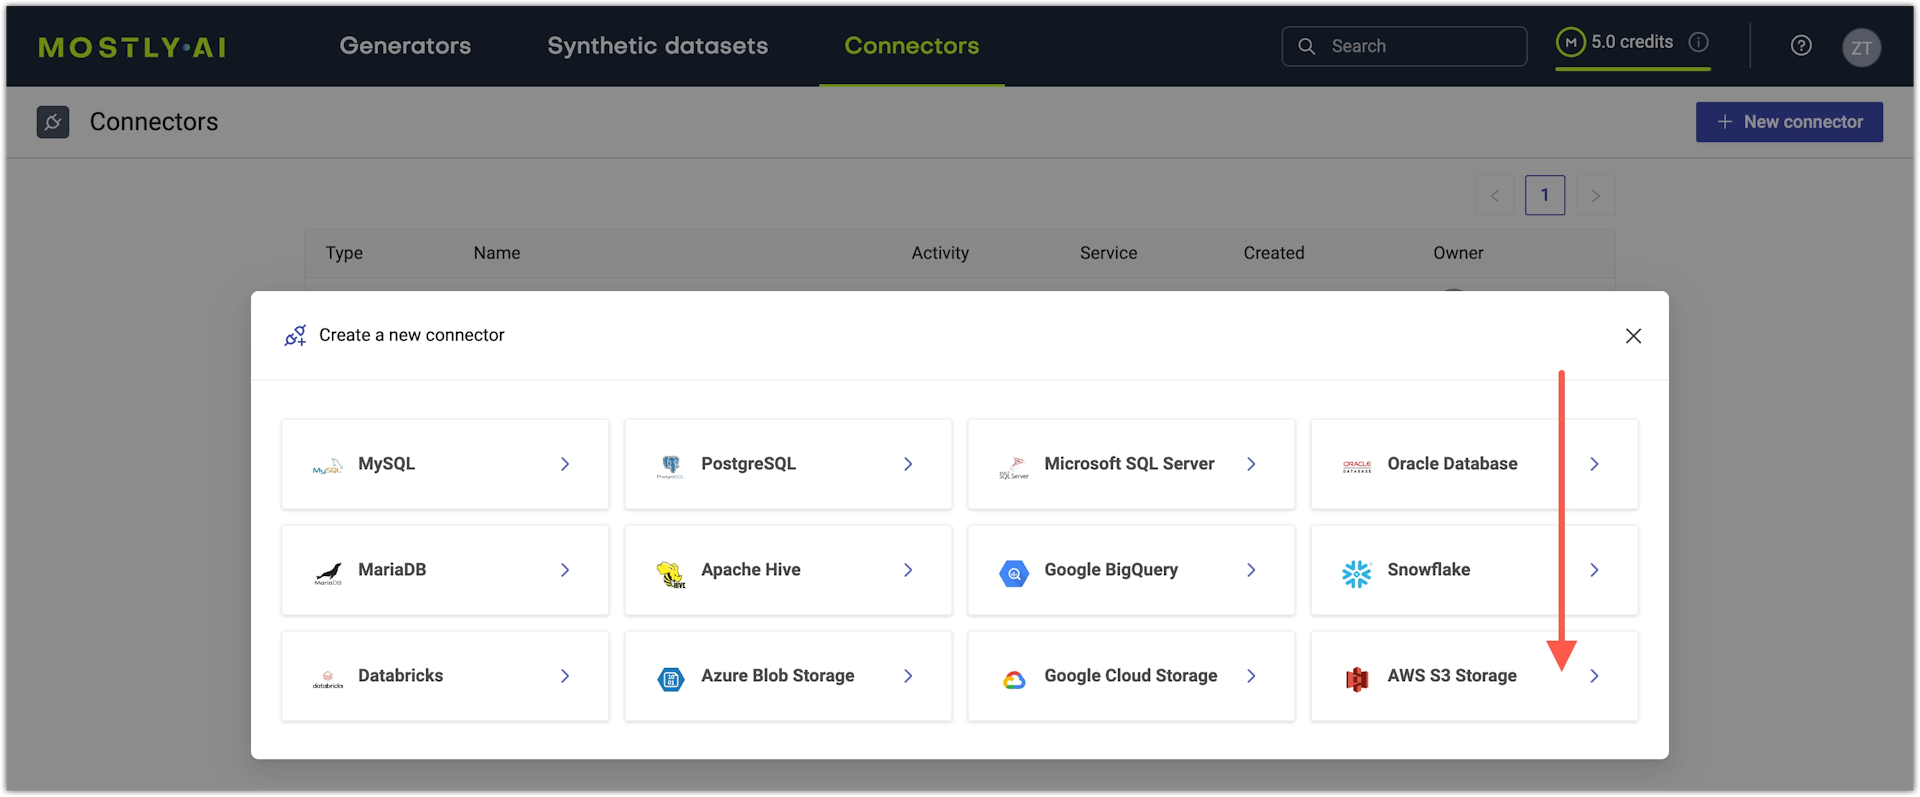 Select AWS S3 storage connector